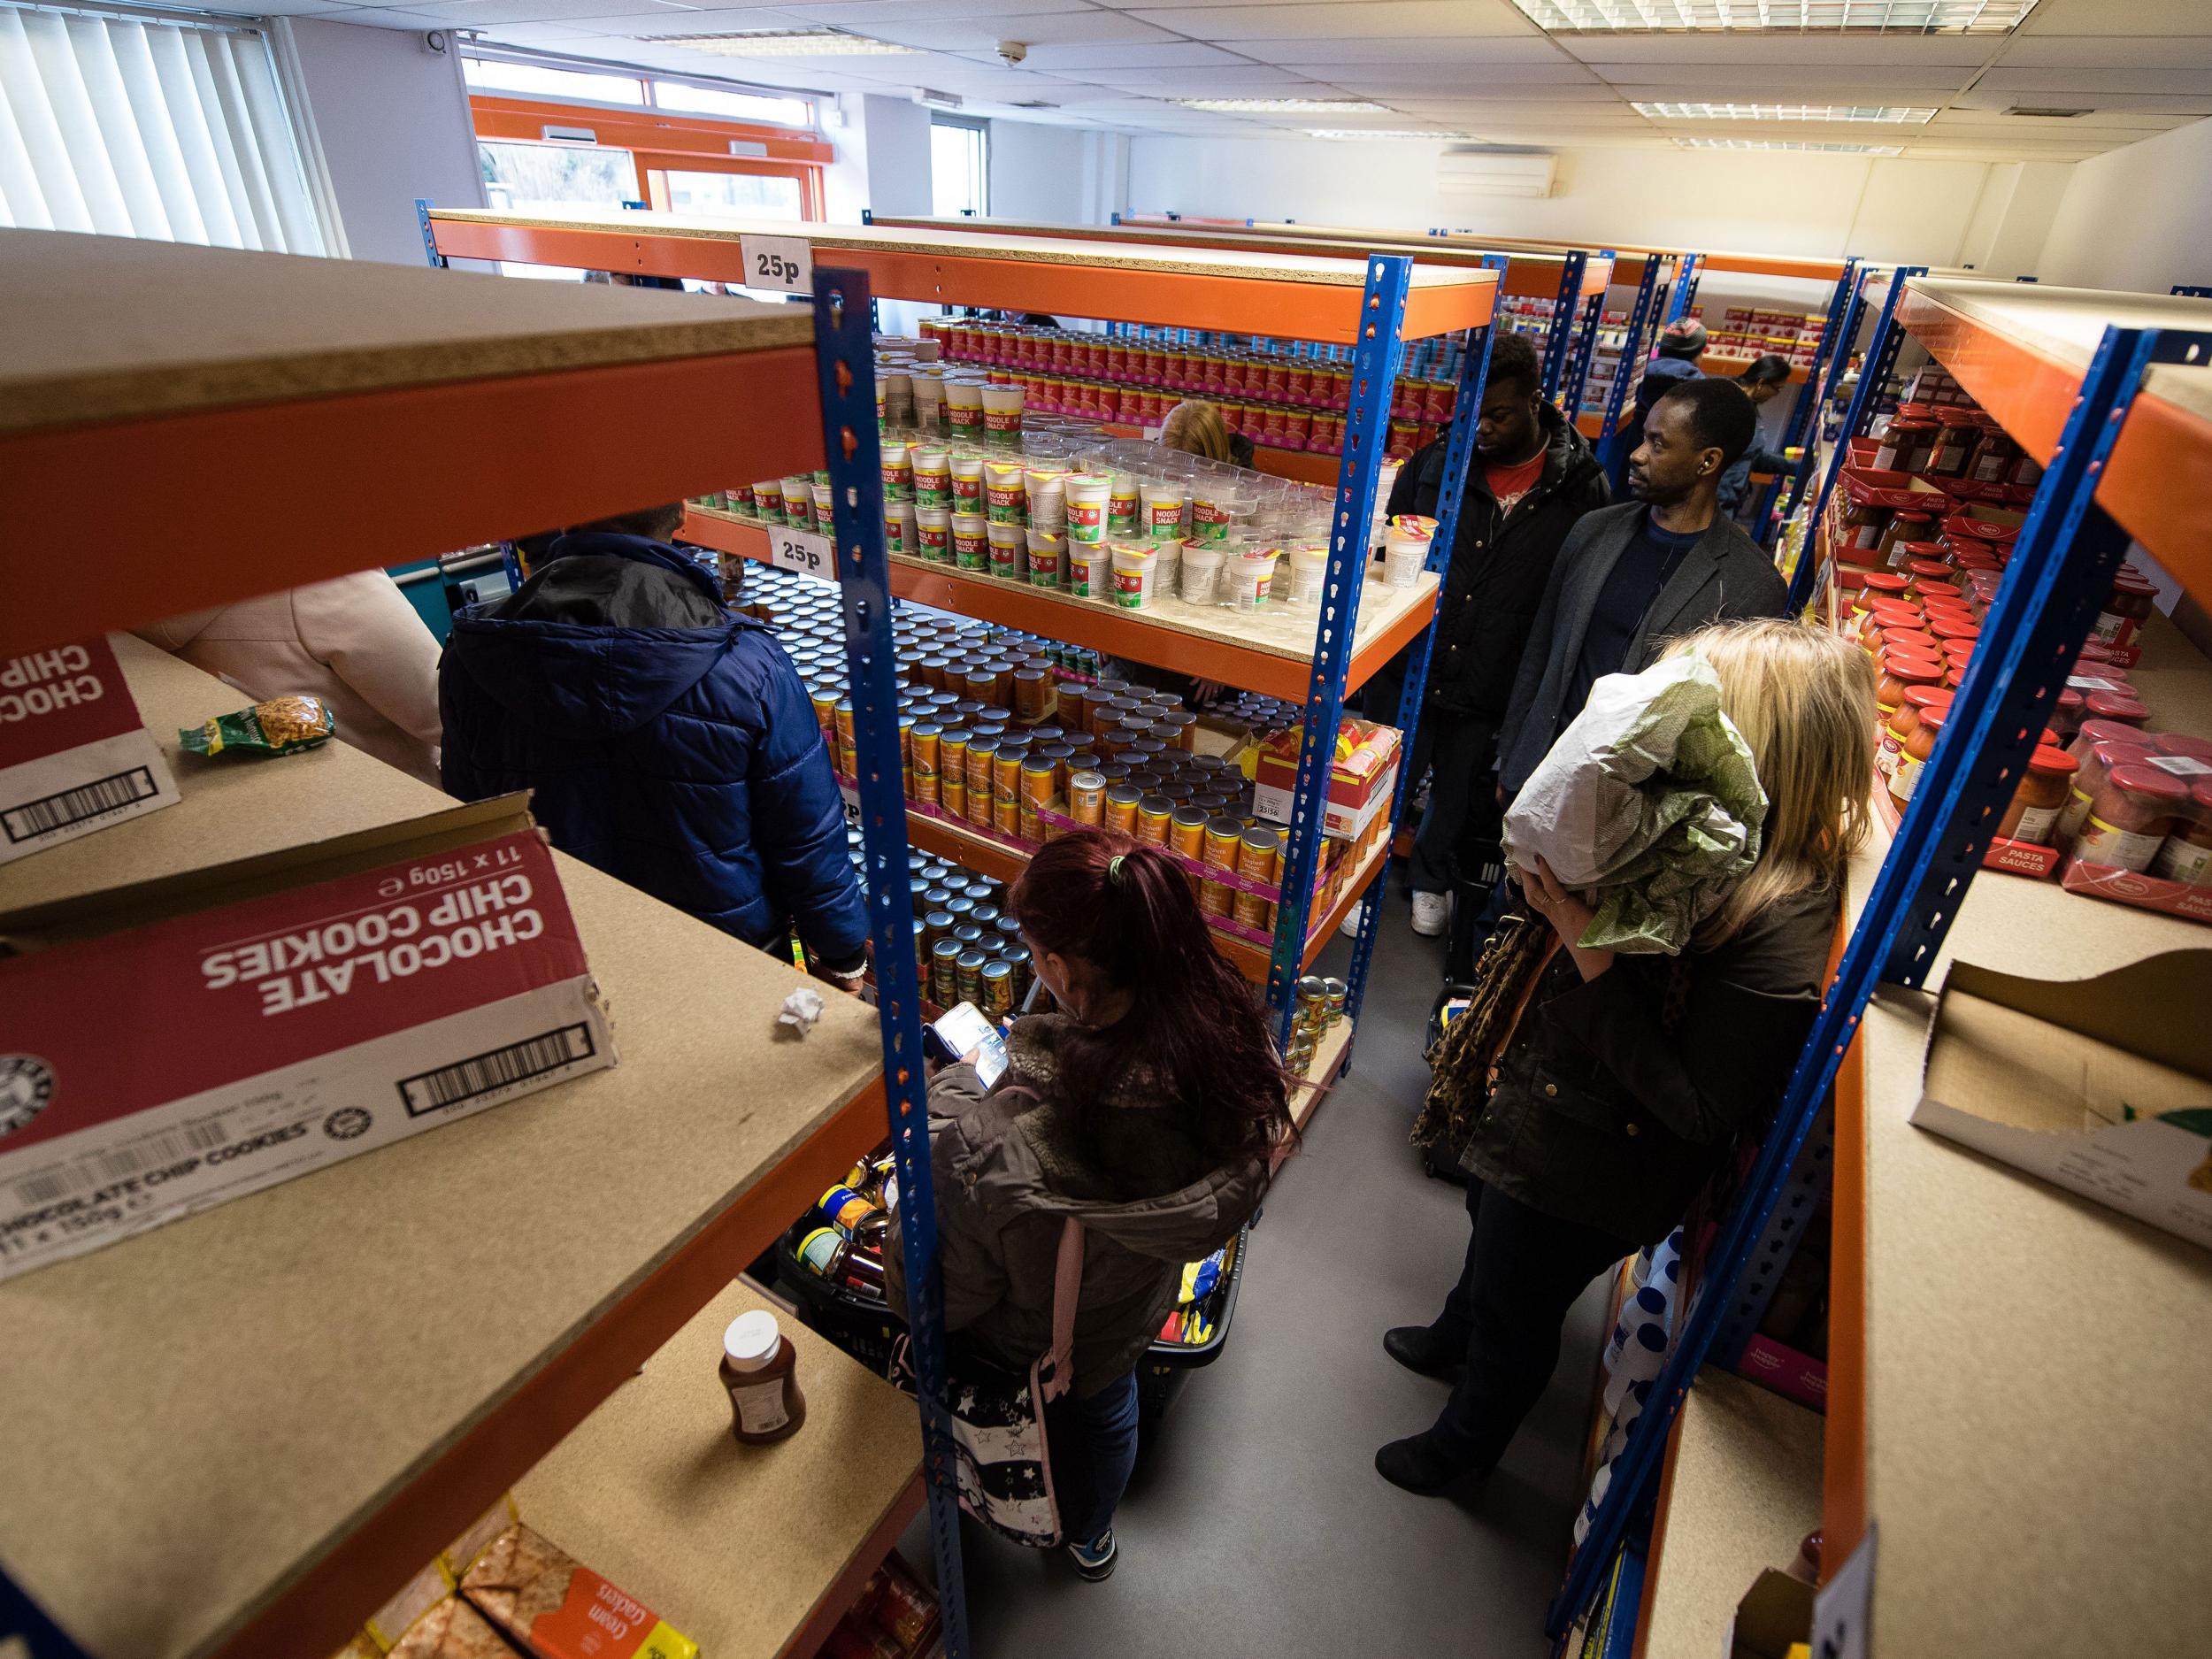 Shoppers queue to pay for their goods at the 'easyFoodstore' in north-west London